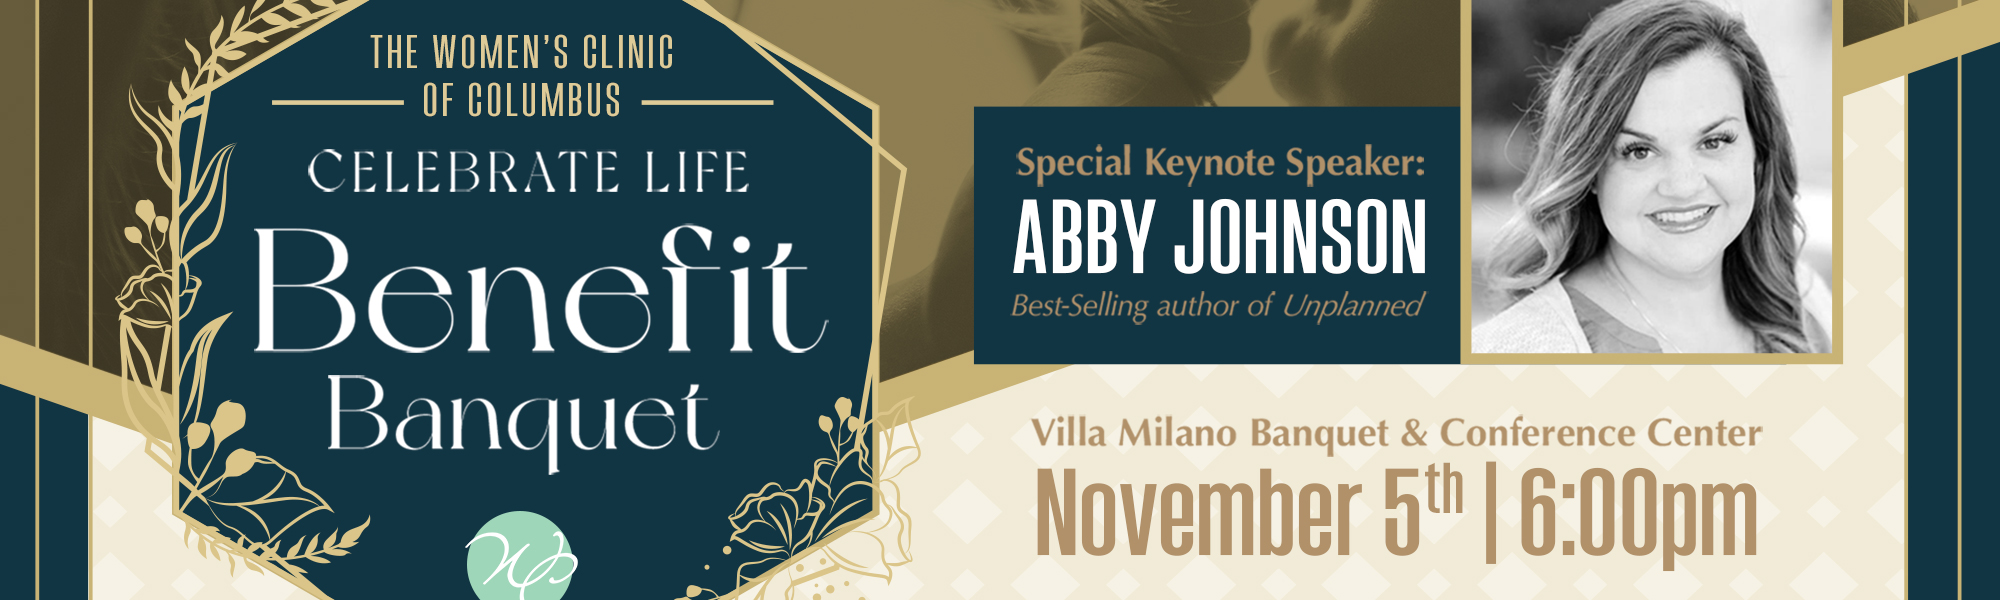 The Women's Clinic of Columbus Celebrate Life Benefit Banquet Special Key Note Speaker: Abby Johnson Best-Selling author of Unplanned. Villa Milano Banquet and Conference Center November 5th 6pm